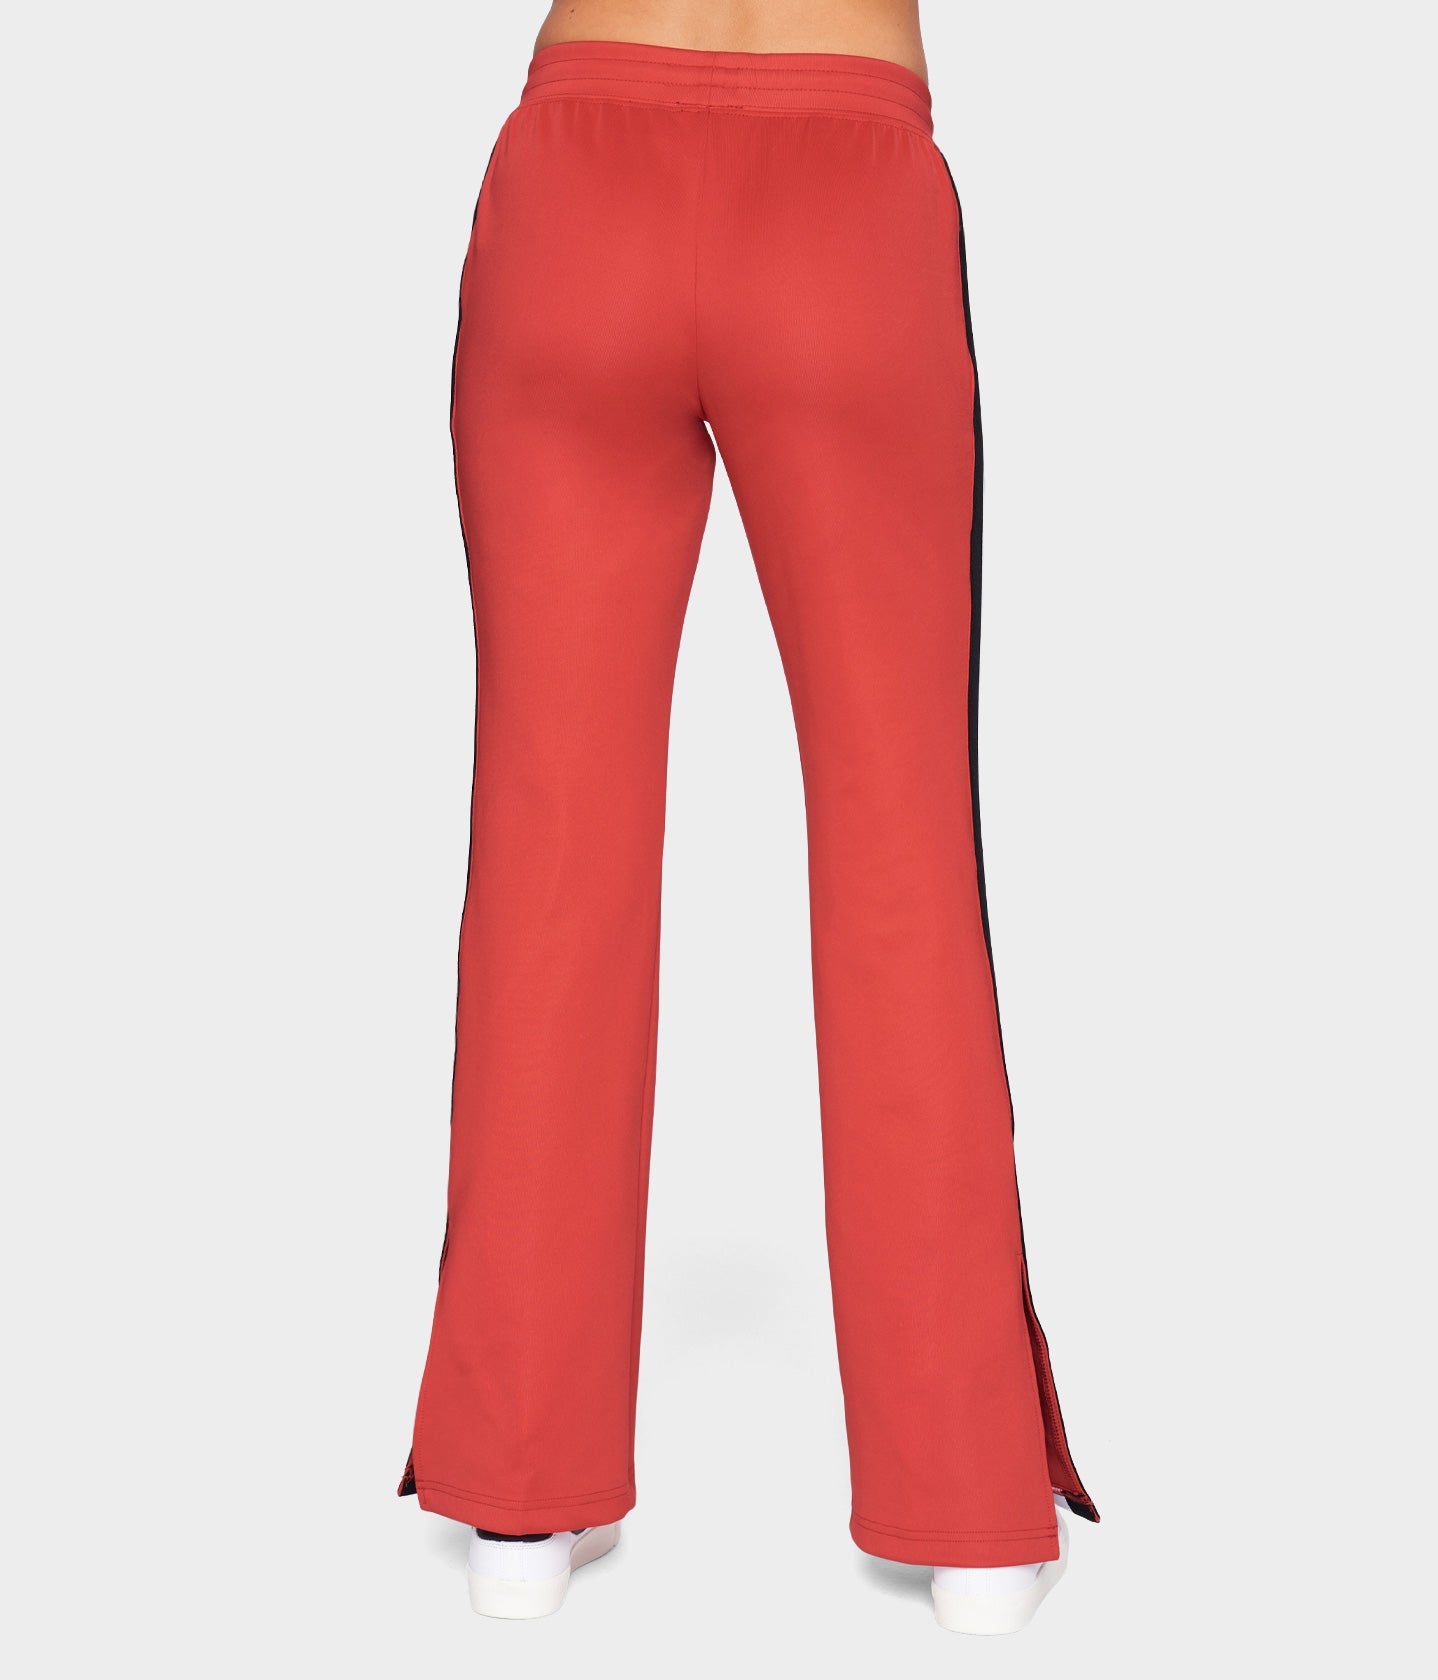 Sidney Red flare leg pant – Lee Rickie Collection